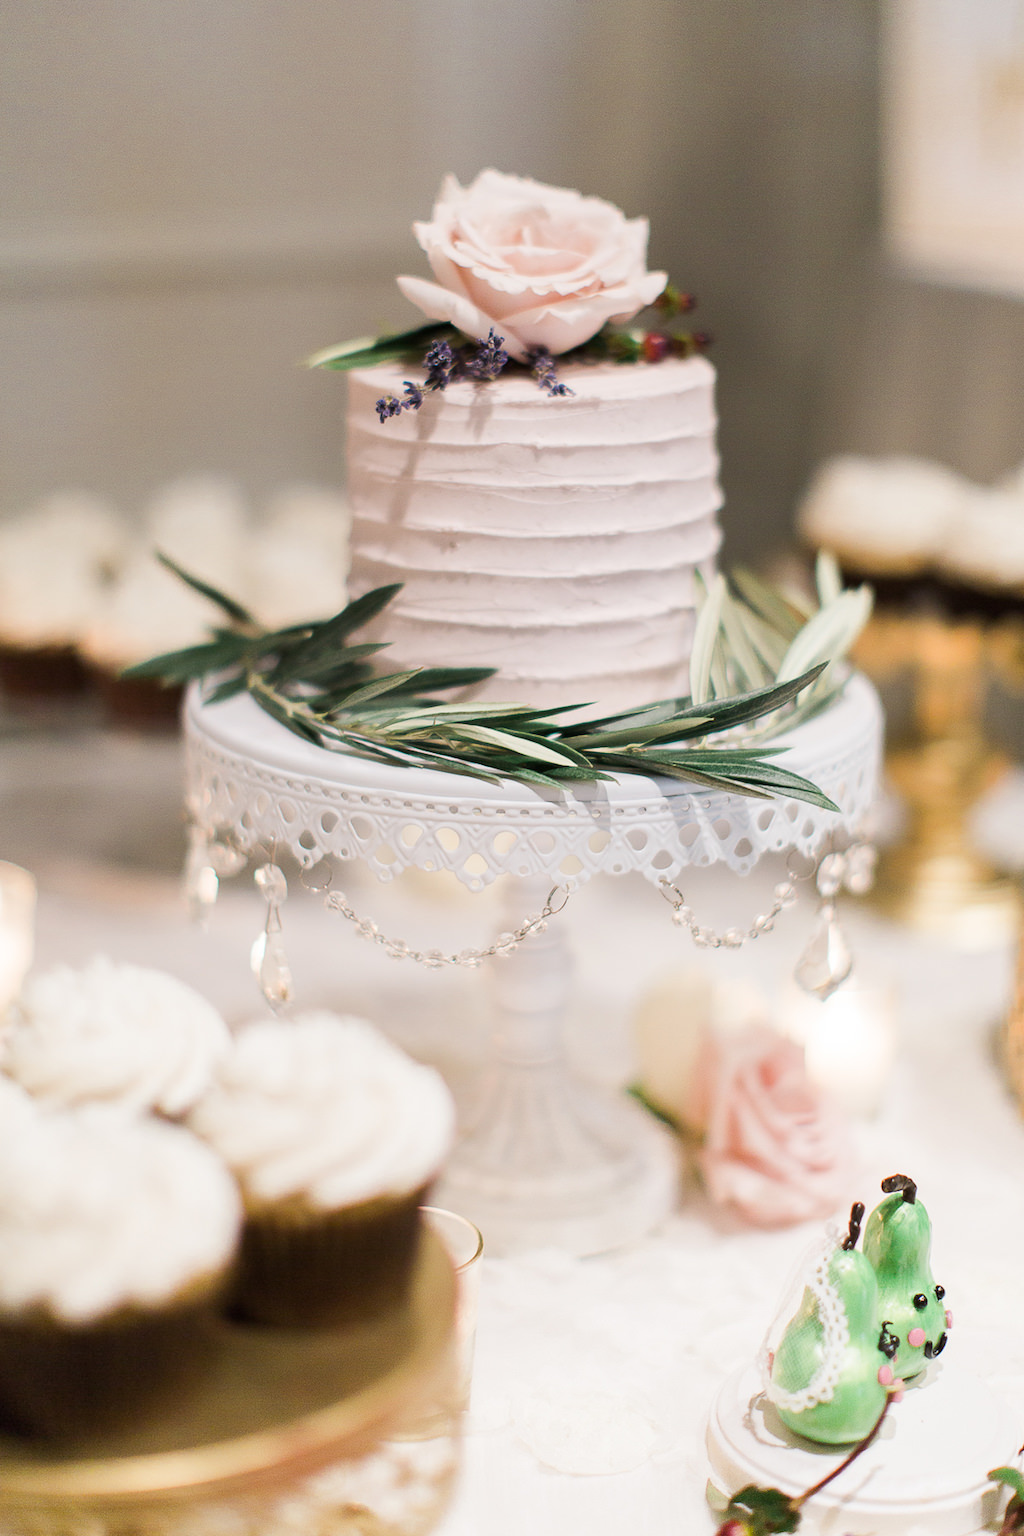 Natural Organic Inspired Small Single Tier Round Wedding Cake with Blush Rose Cake Topper and Fresh Rosemary and Pink Icing on White Jeweled Cake Stand | Tampa Bay Wedding